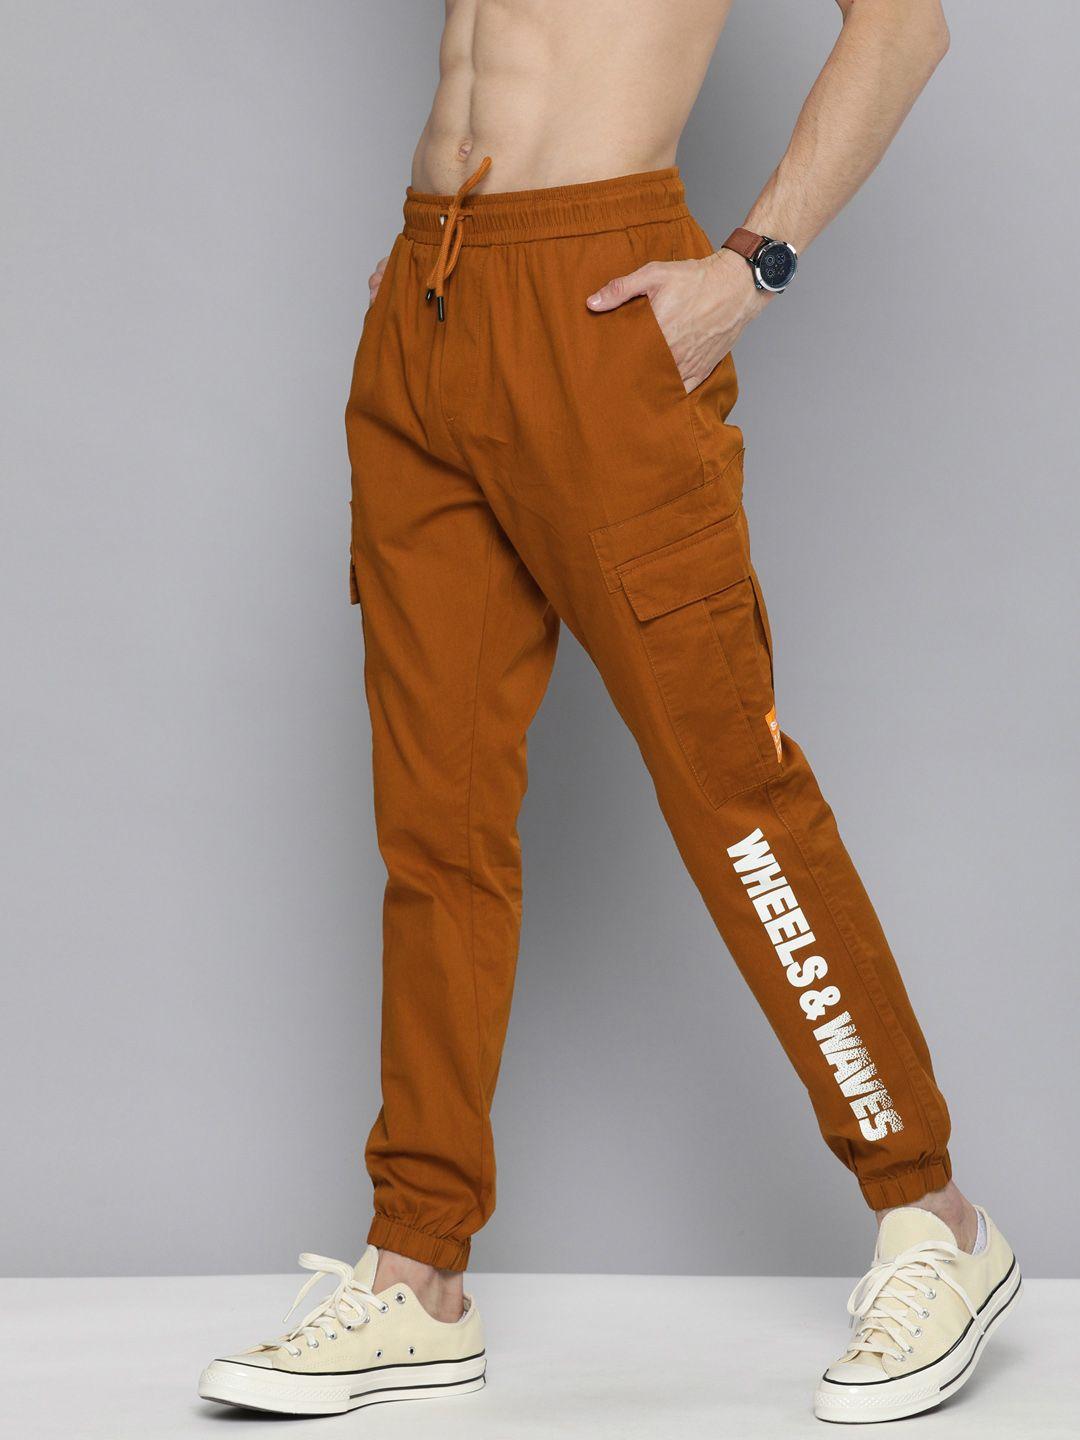 here&now-men-brown-printed-joggers-trousers